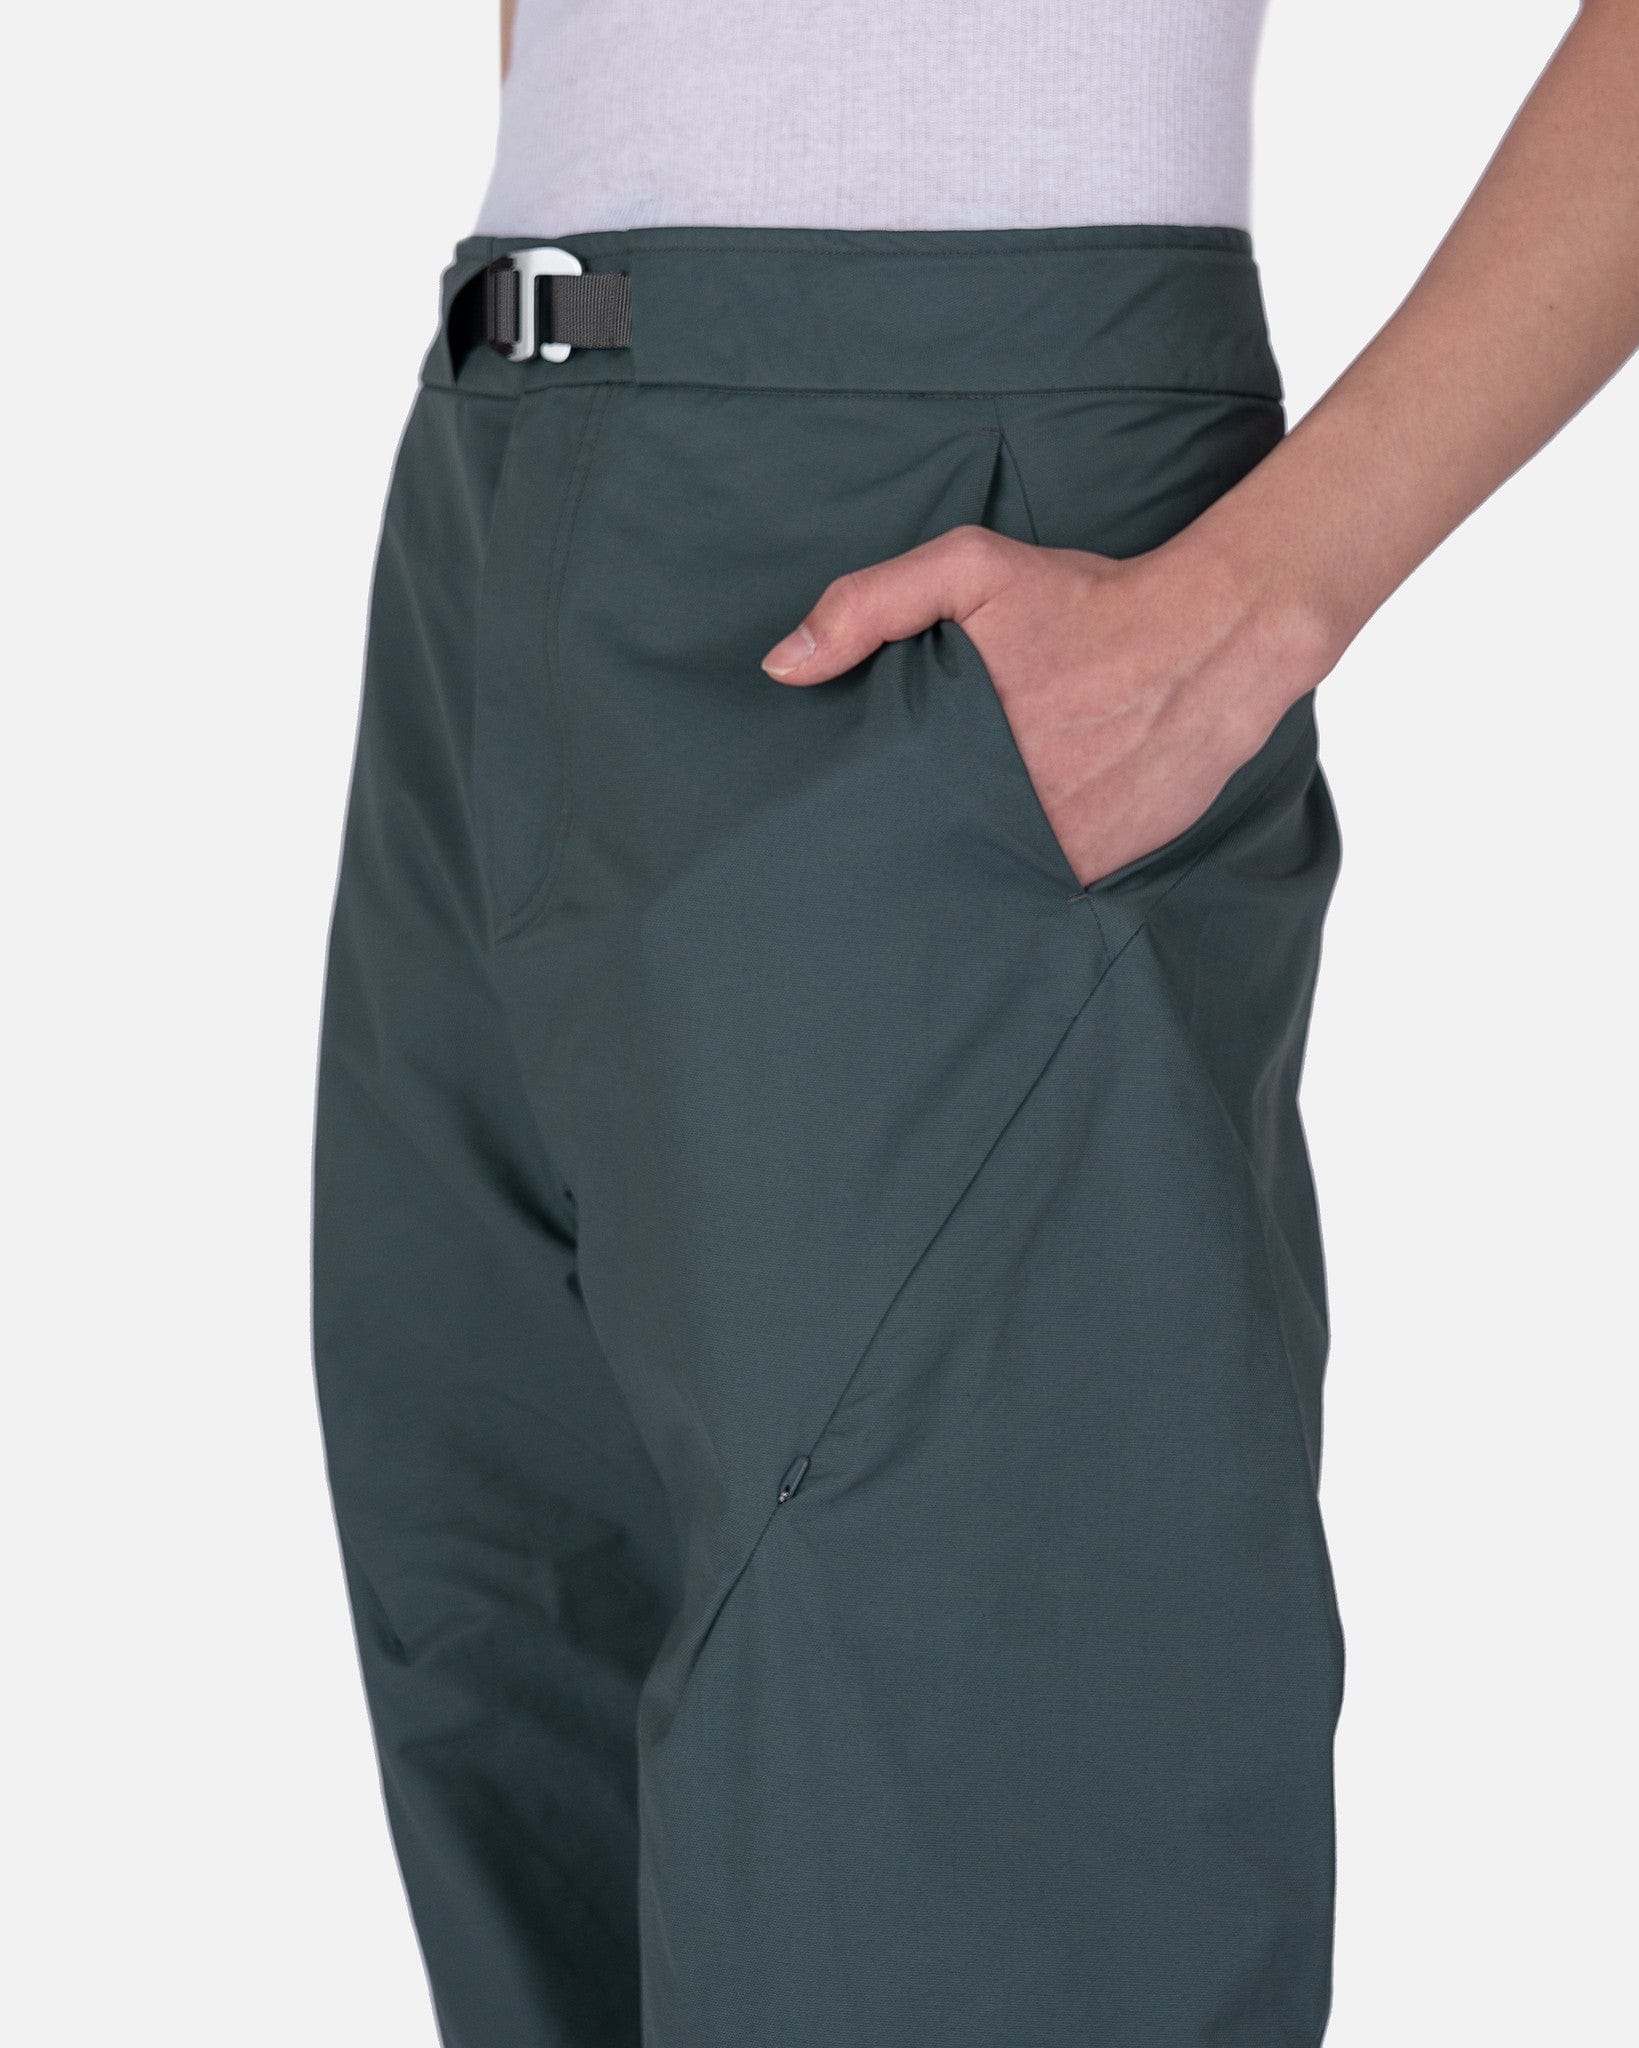 POST ARCHIVE FACTION (P.A.F) Men's Pants 5.0 Technical Pants Right in Teal